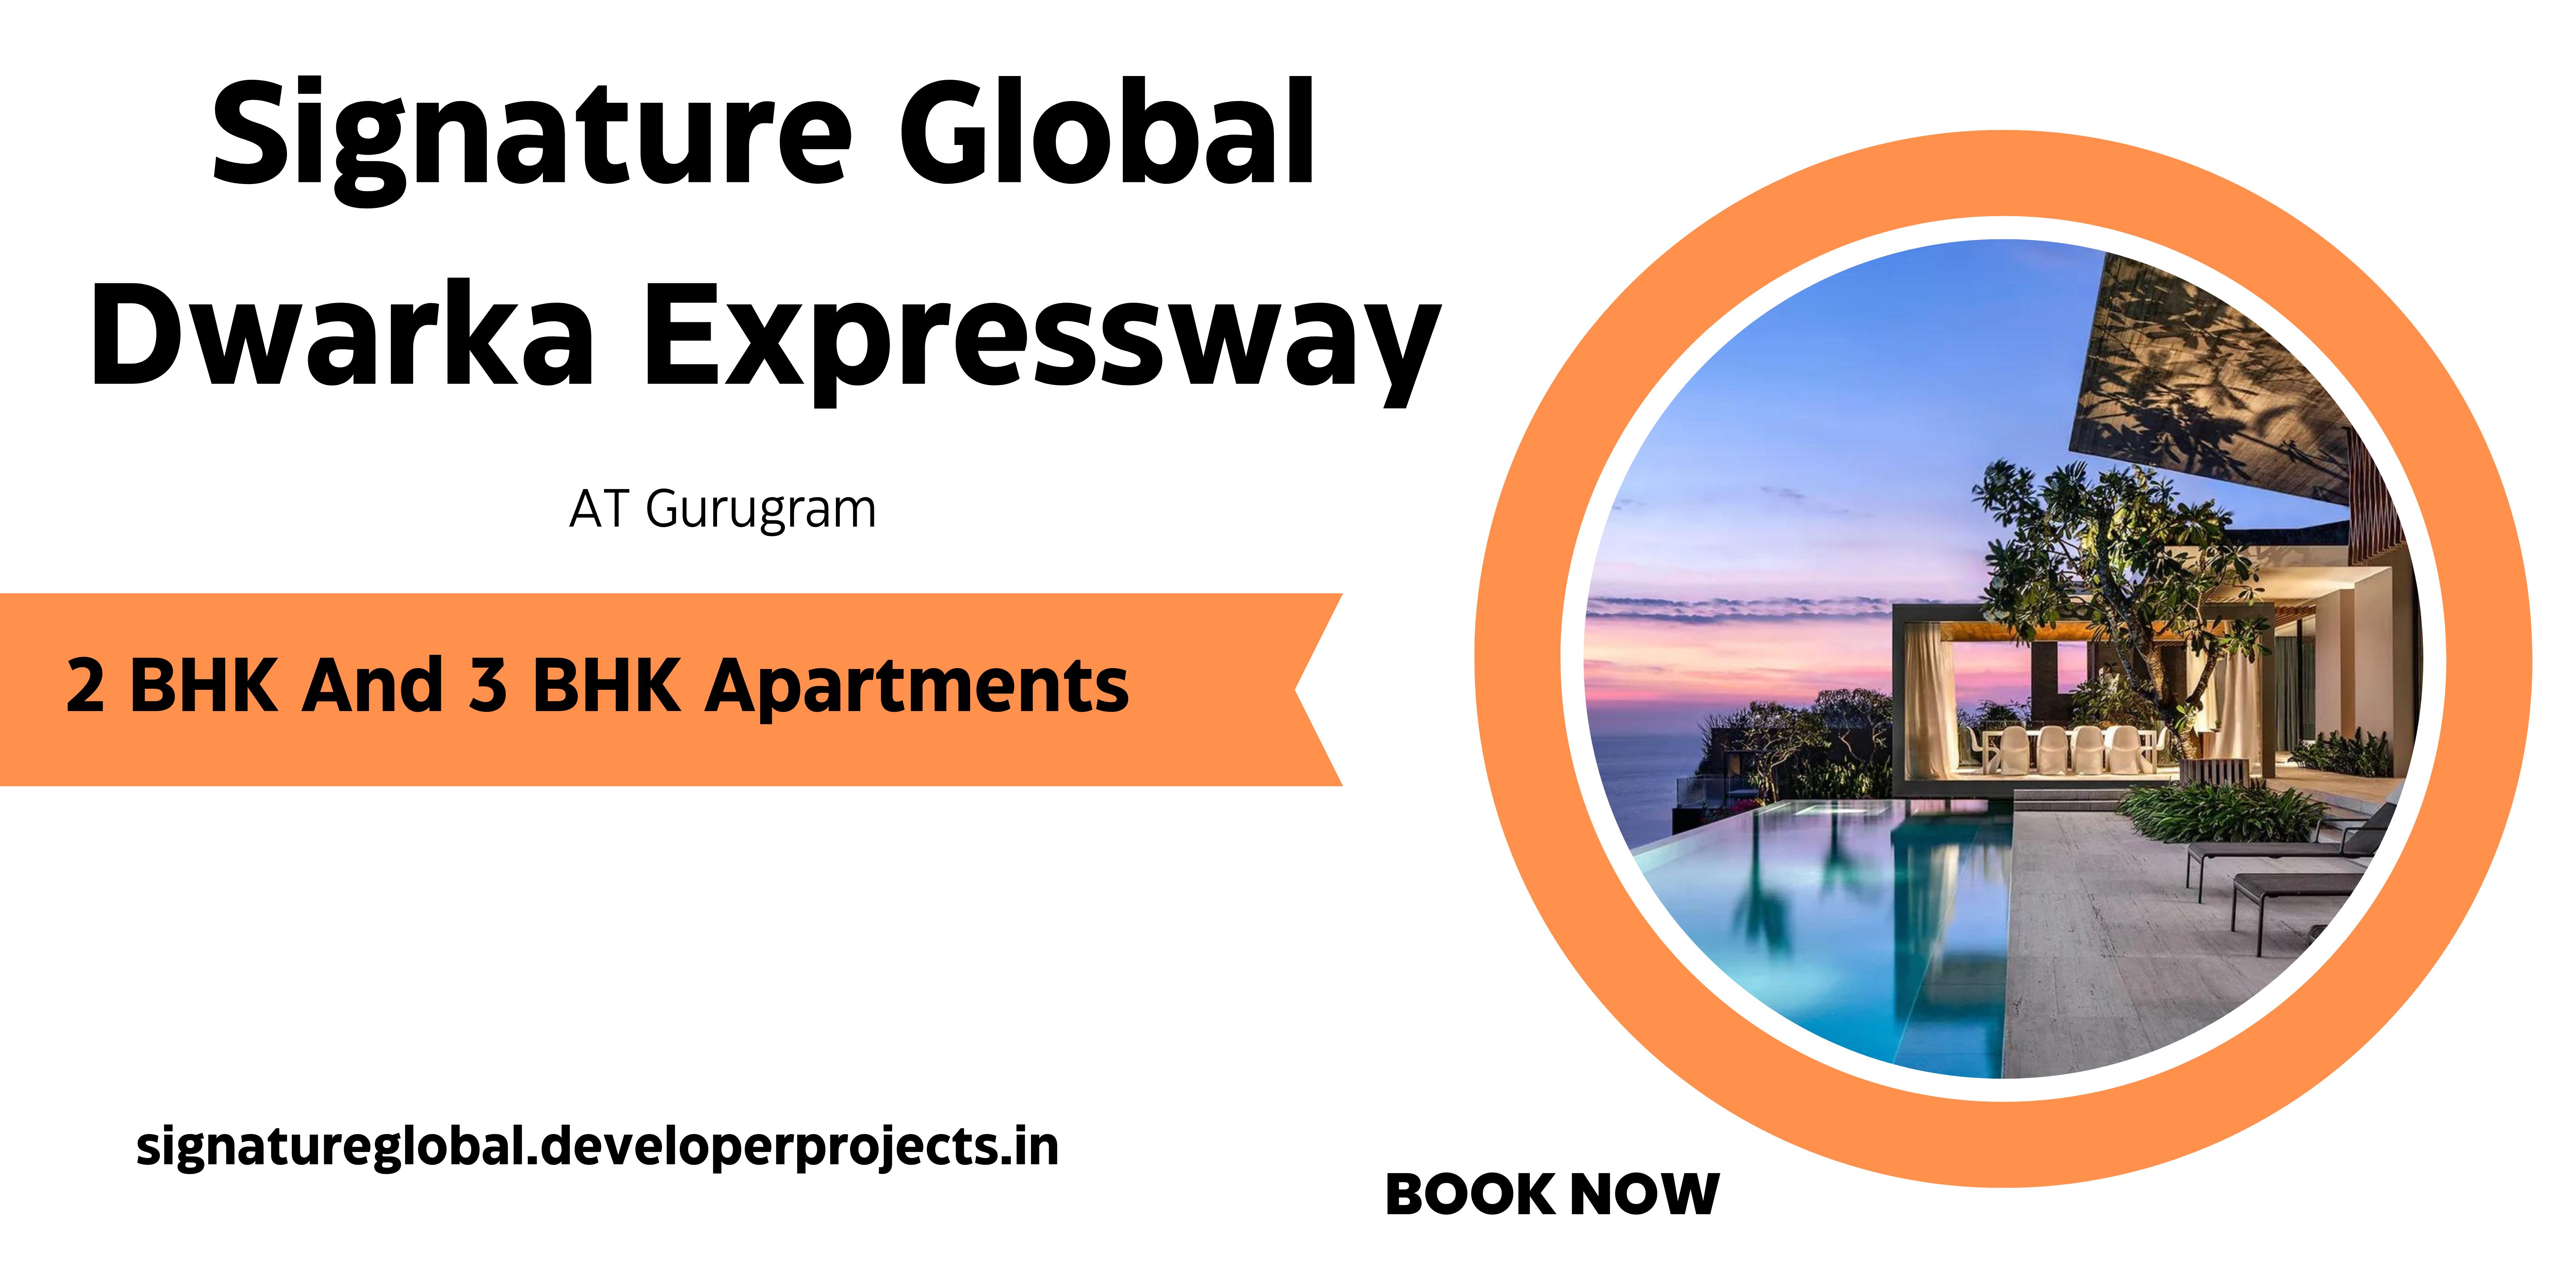 Signature Global Dwarka Expressway Gurgaon - The Luxury That Can Buy You Comfort